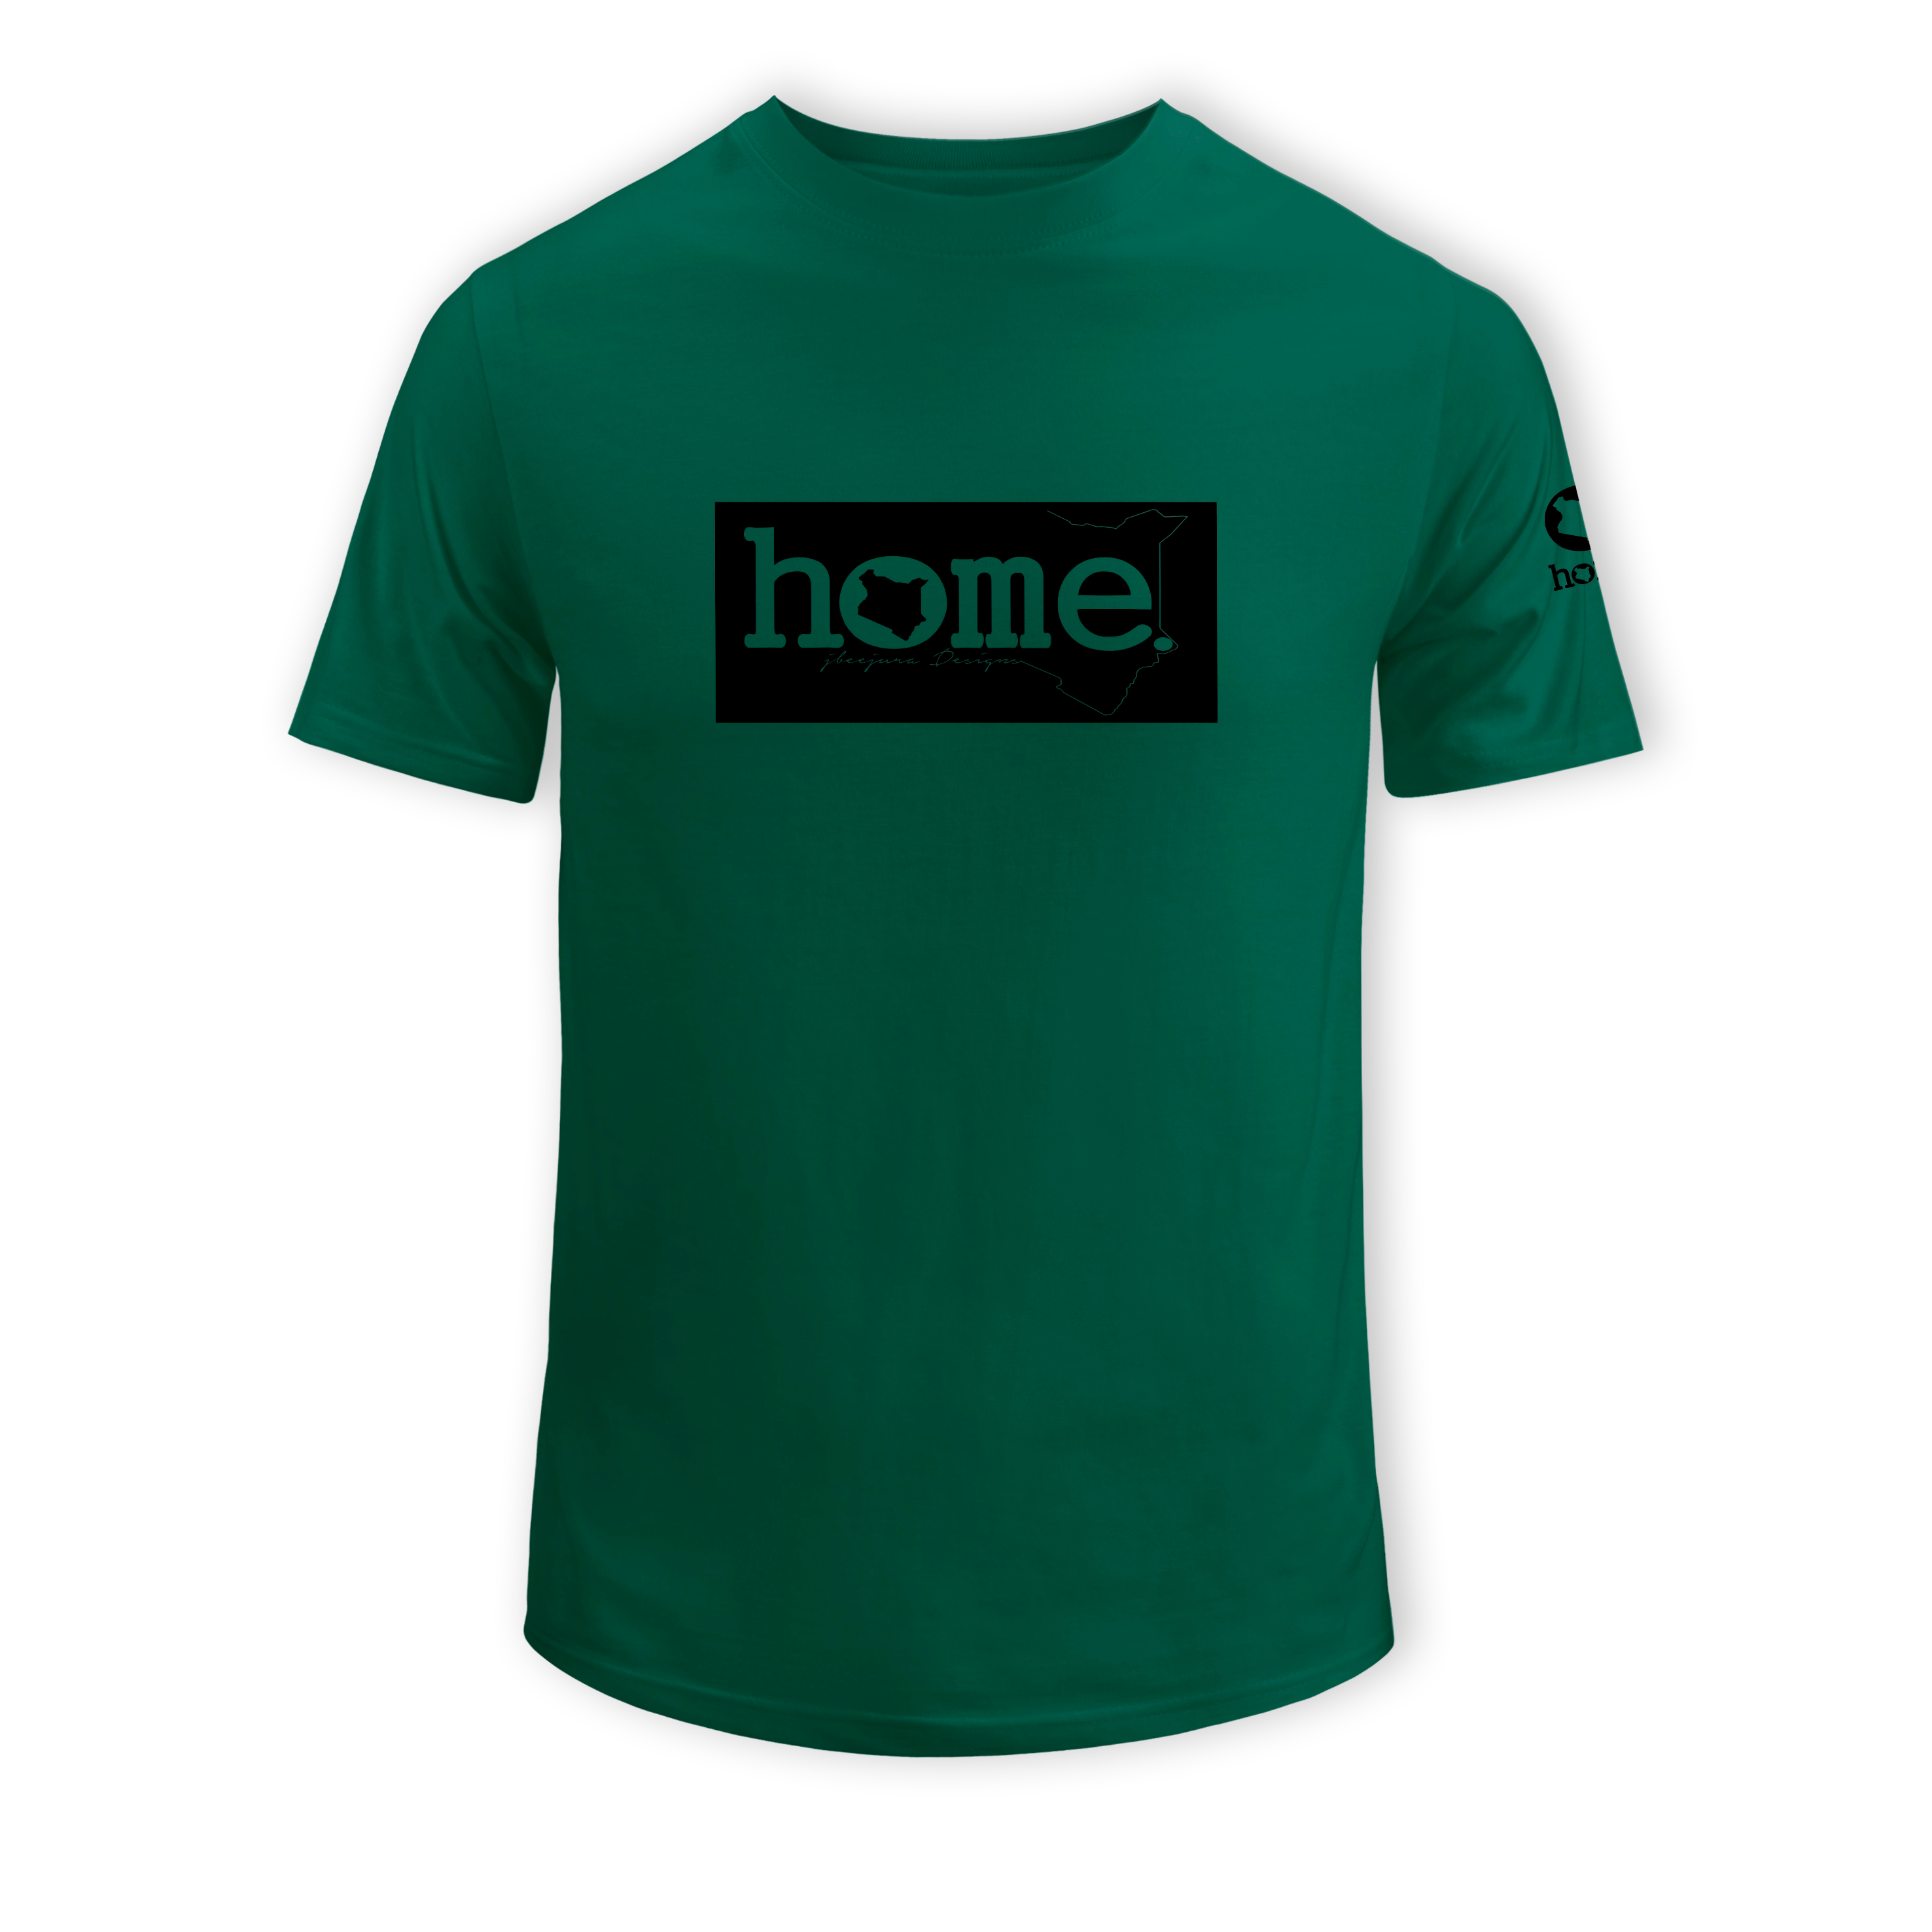 home_254 SHORT-SLEEVED RICH GREEN T-SHIRT WITH A BLACK CLASSIC PRINT – COTTON PLUS FABRIC